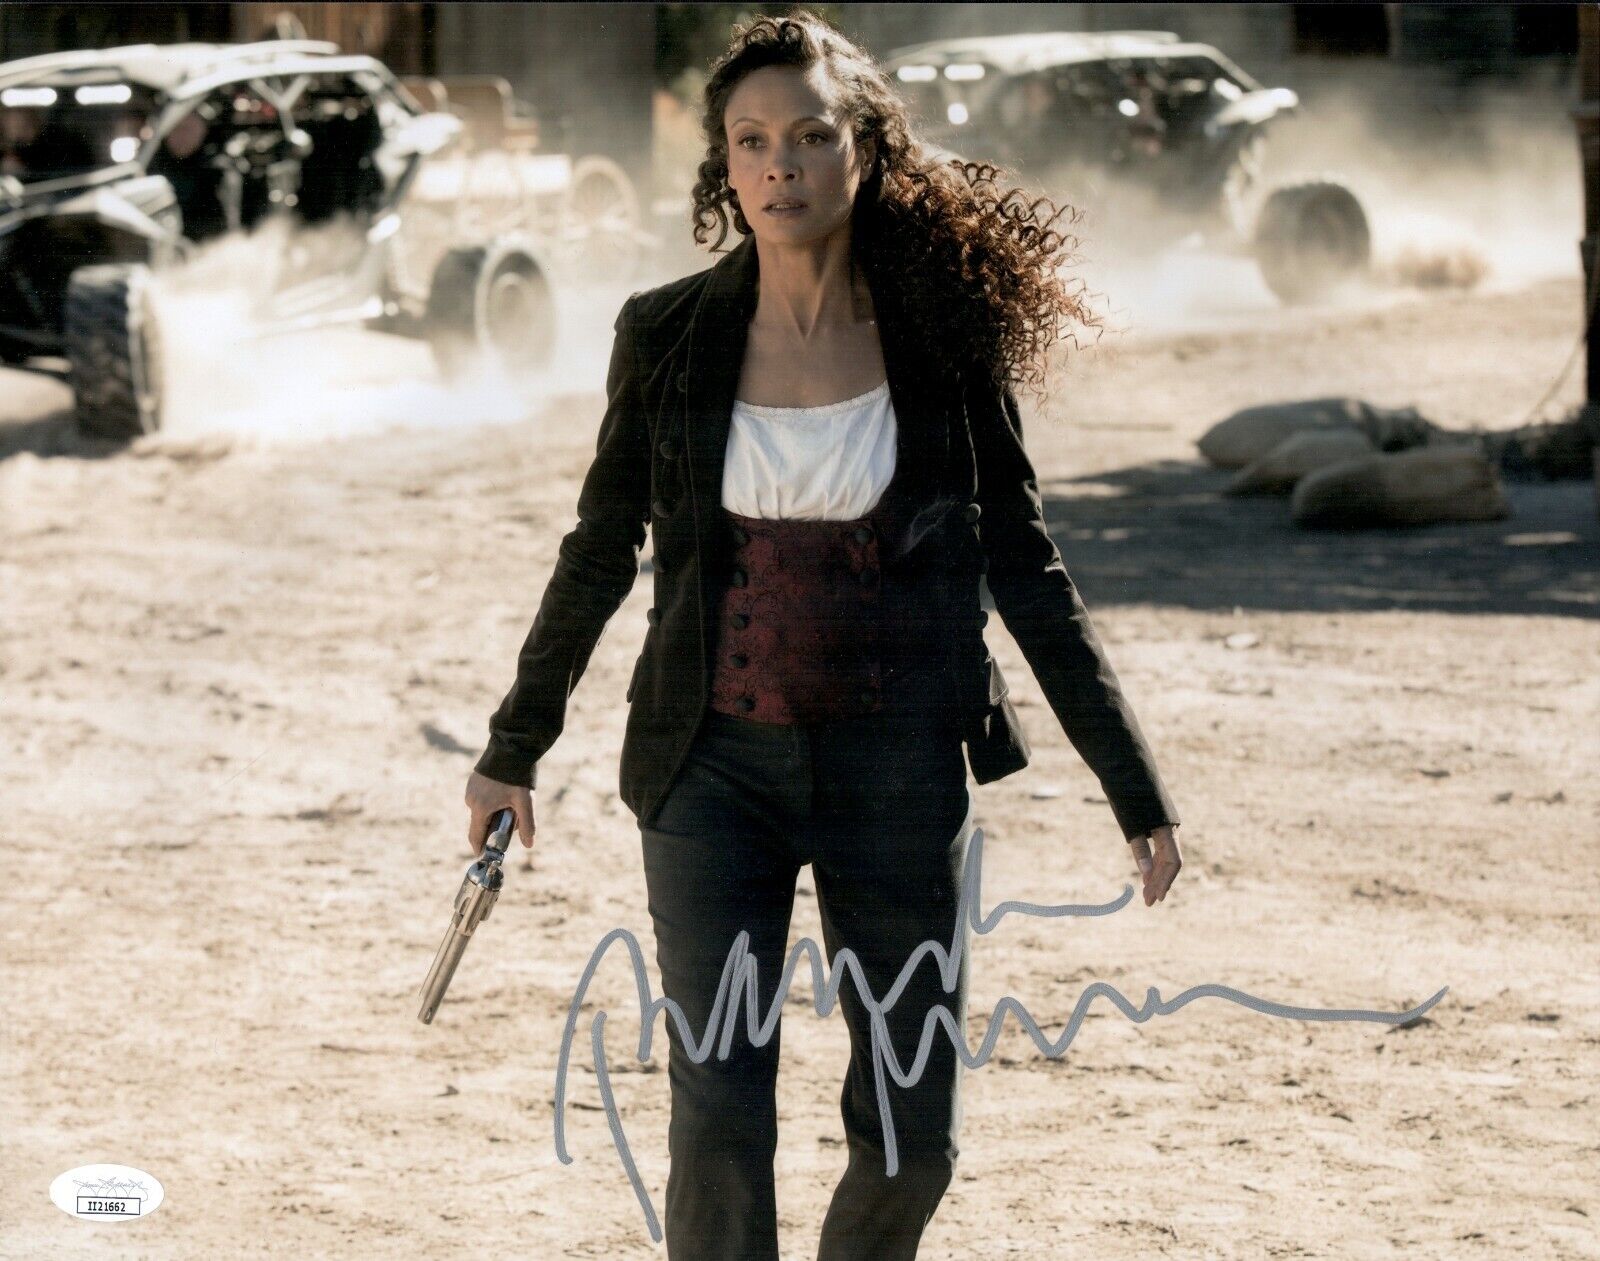 THANDIE NEWTON Signed 11x14 Photo Poster painting WESTWORLD In Person Autograph JSA COA Cert